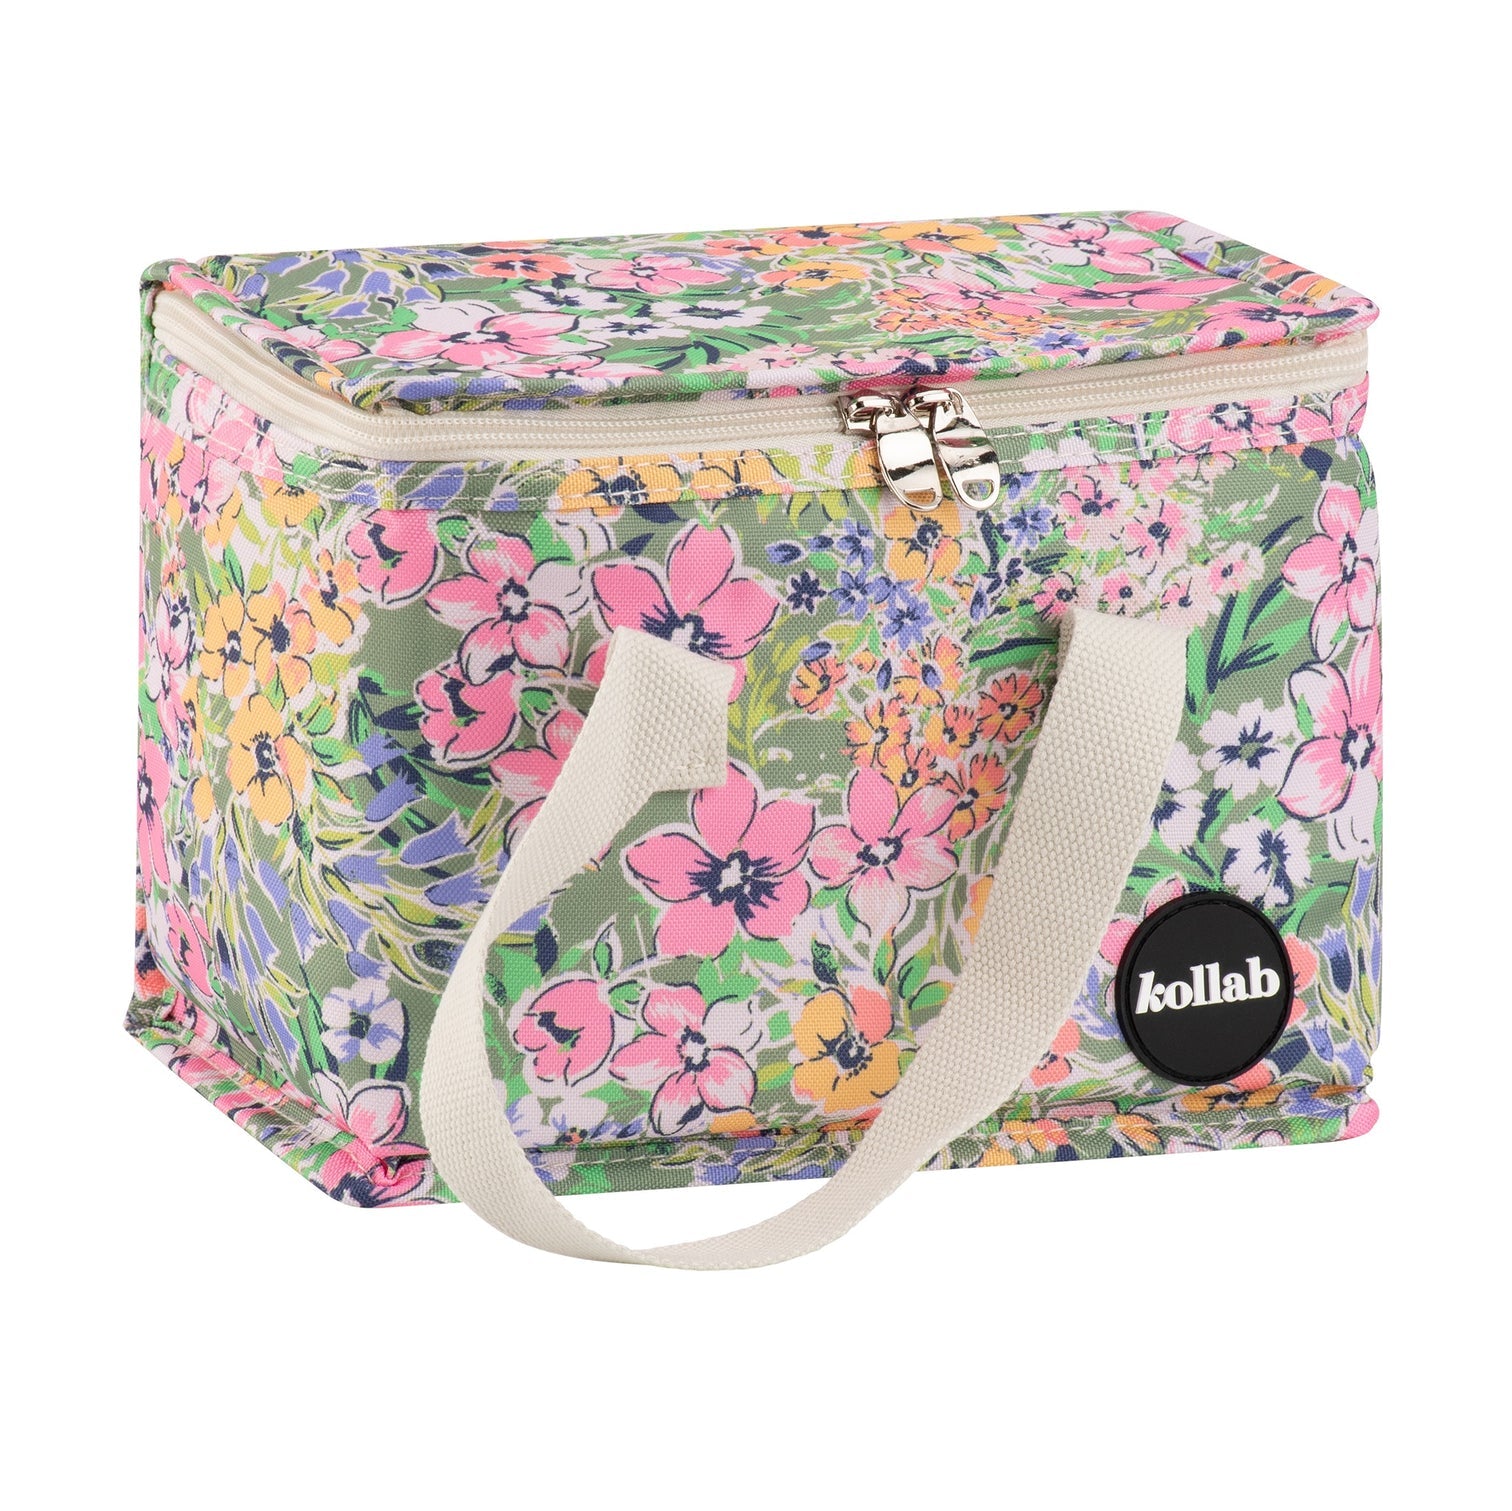 Kollab Holiday Lunch Box Petite Blooms